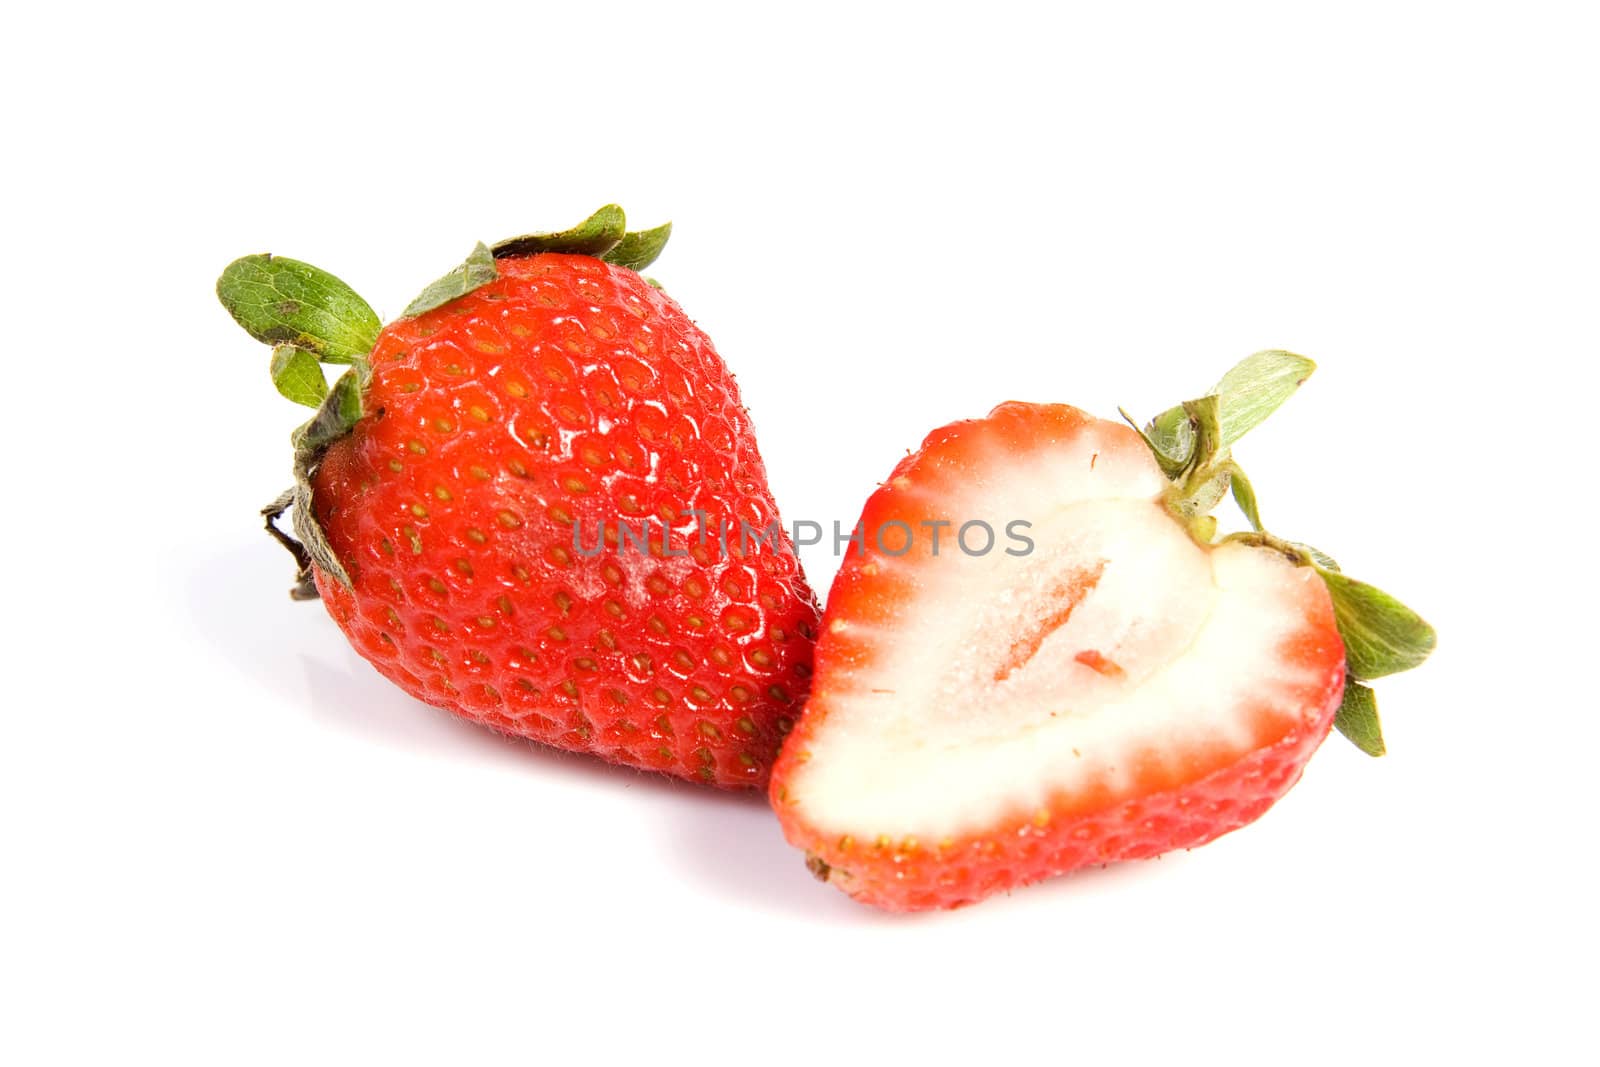 Fresh ripe red strawberries on white. The strawbery in front is sliced in half.